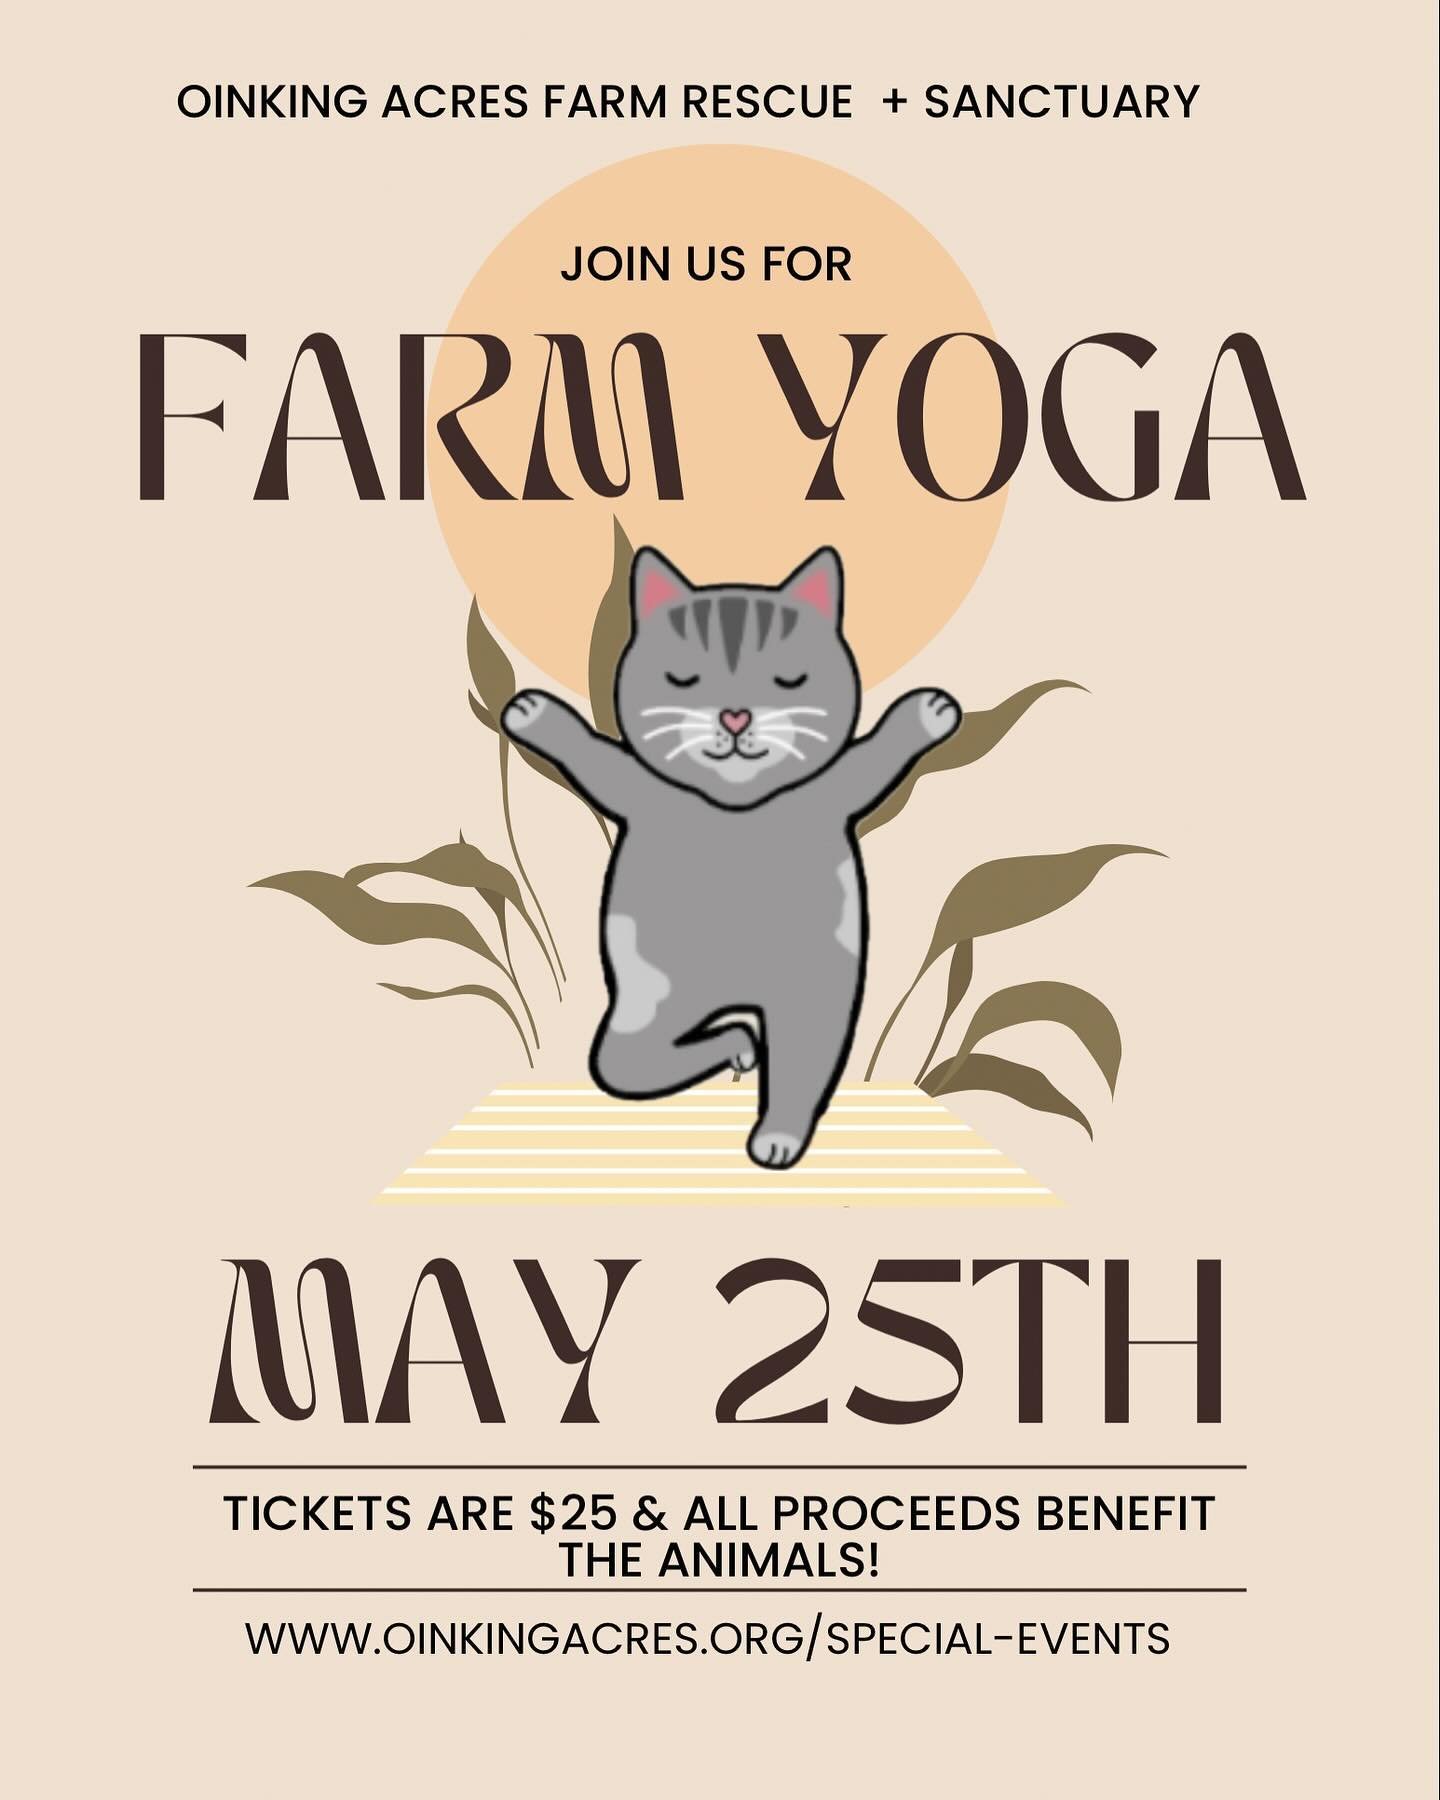 Yoga is next weekend!! Have you got your tickets yet? Summer is here and that means yoga is out in the pasture amongst the pigs, goats, cats, ducks, chickens, and our friendly turkey. You don&rsquo;t wanna miss out on this event. After yoga the sanct